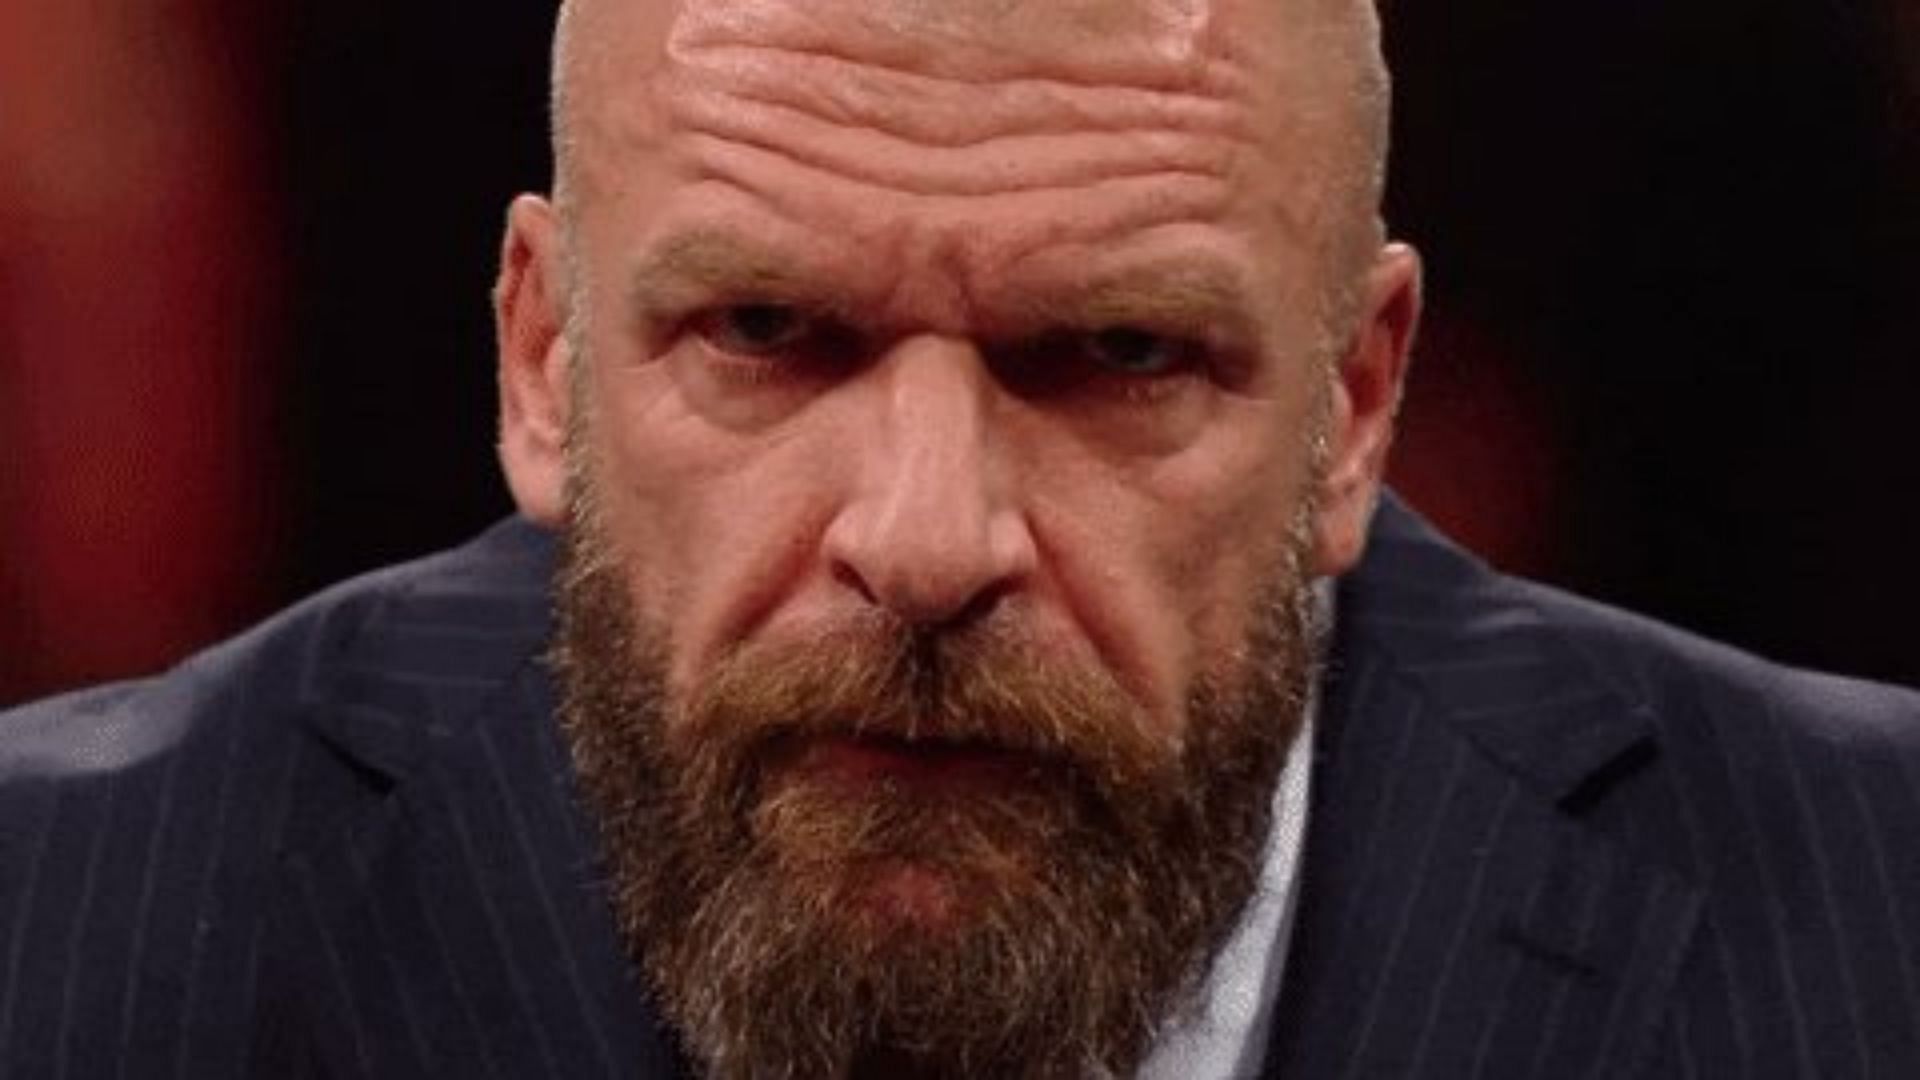 This AEW star had a lot of heat with Triple H during his time in WWE